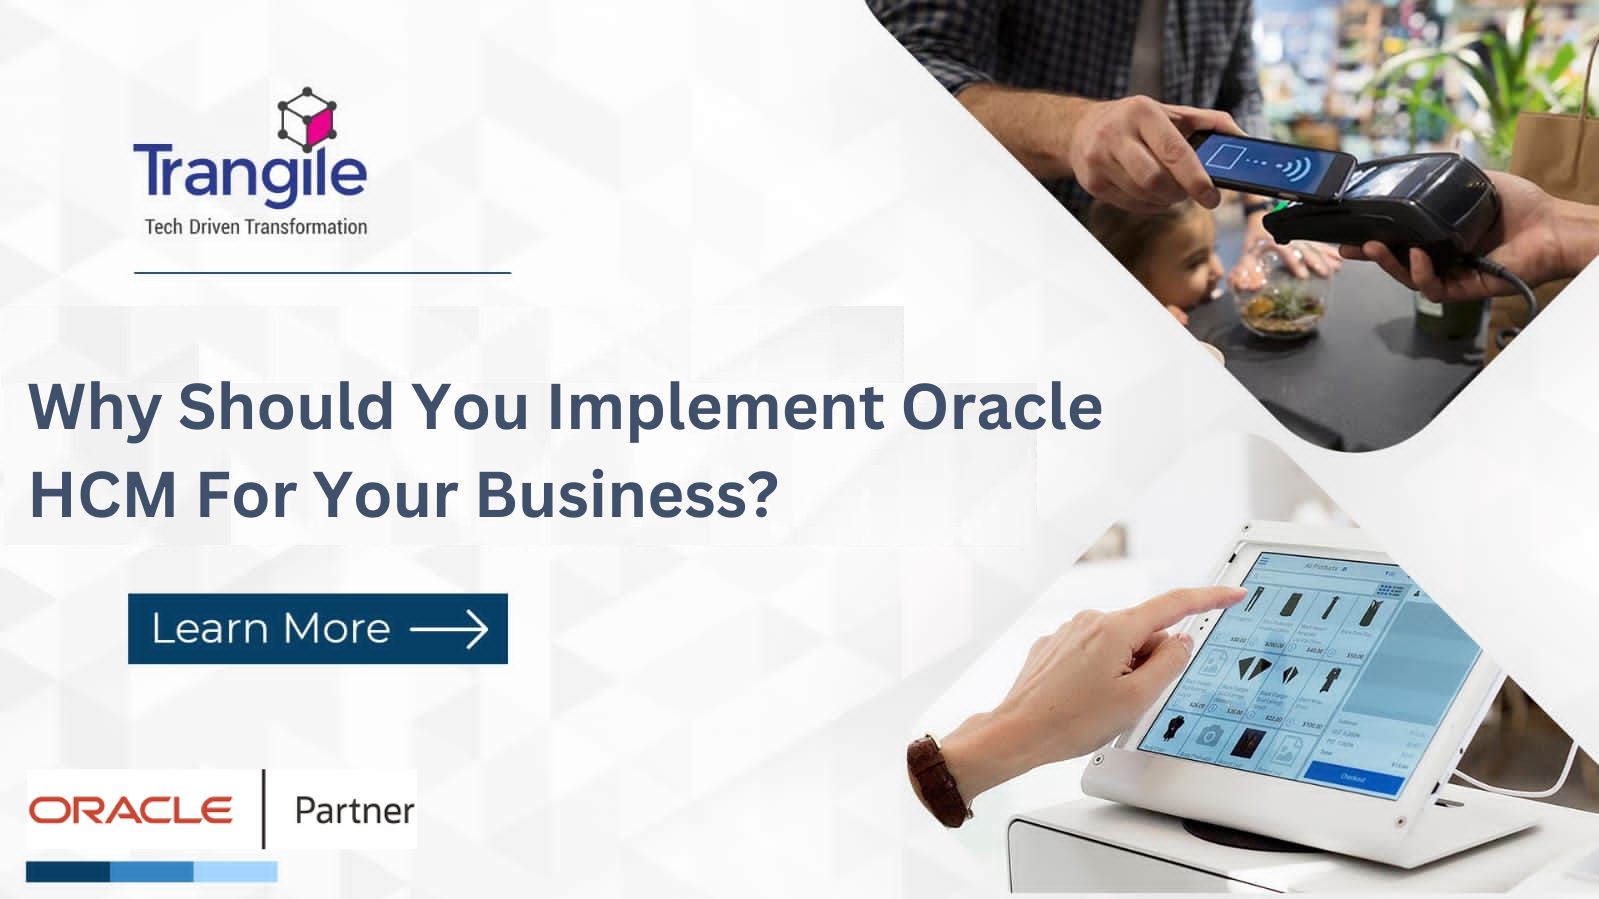 Why Should You Implement Oracle HCM For Your Company?